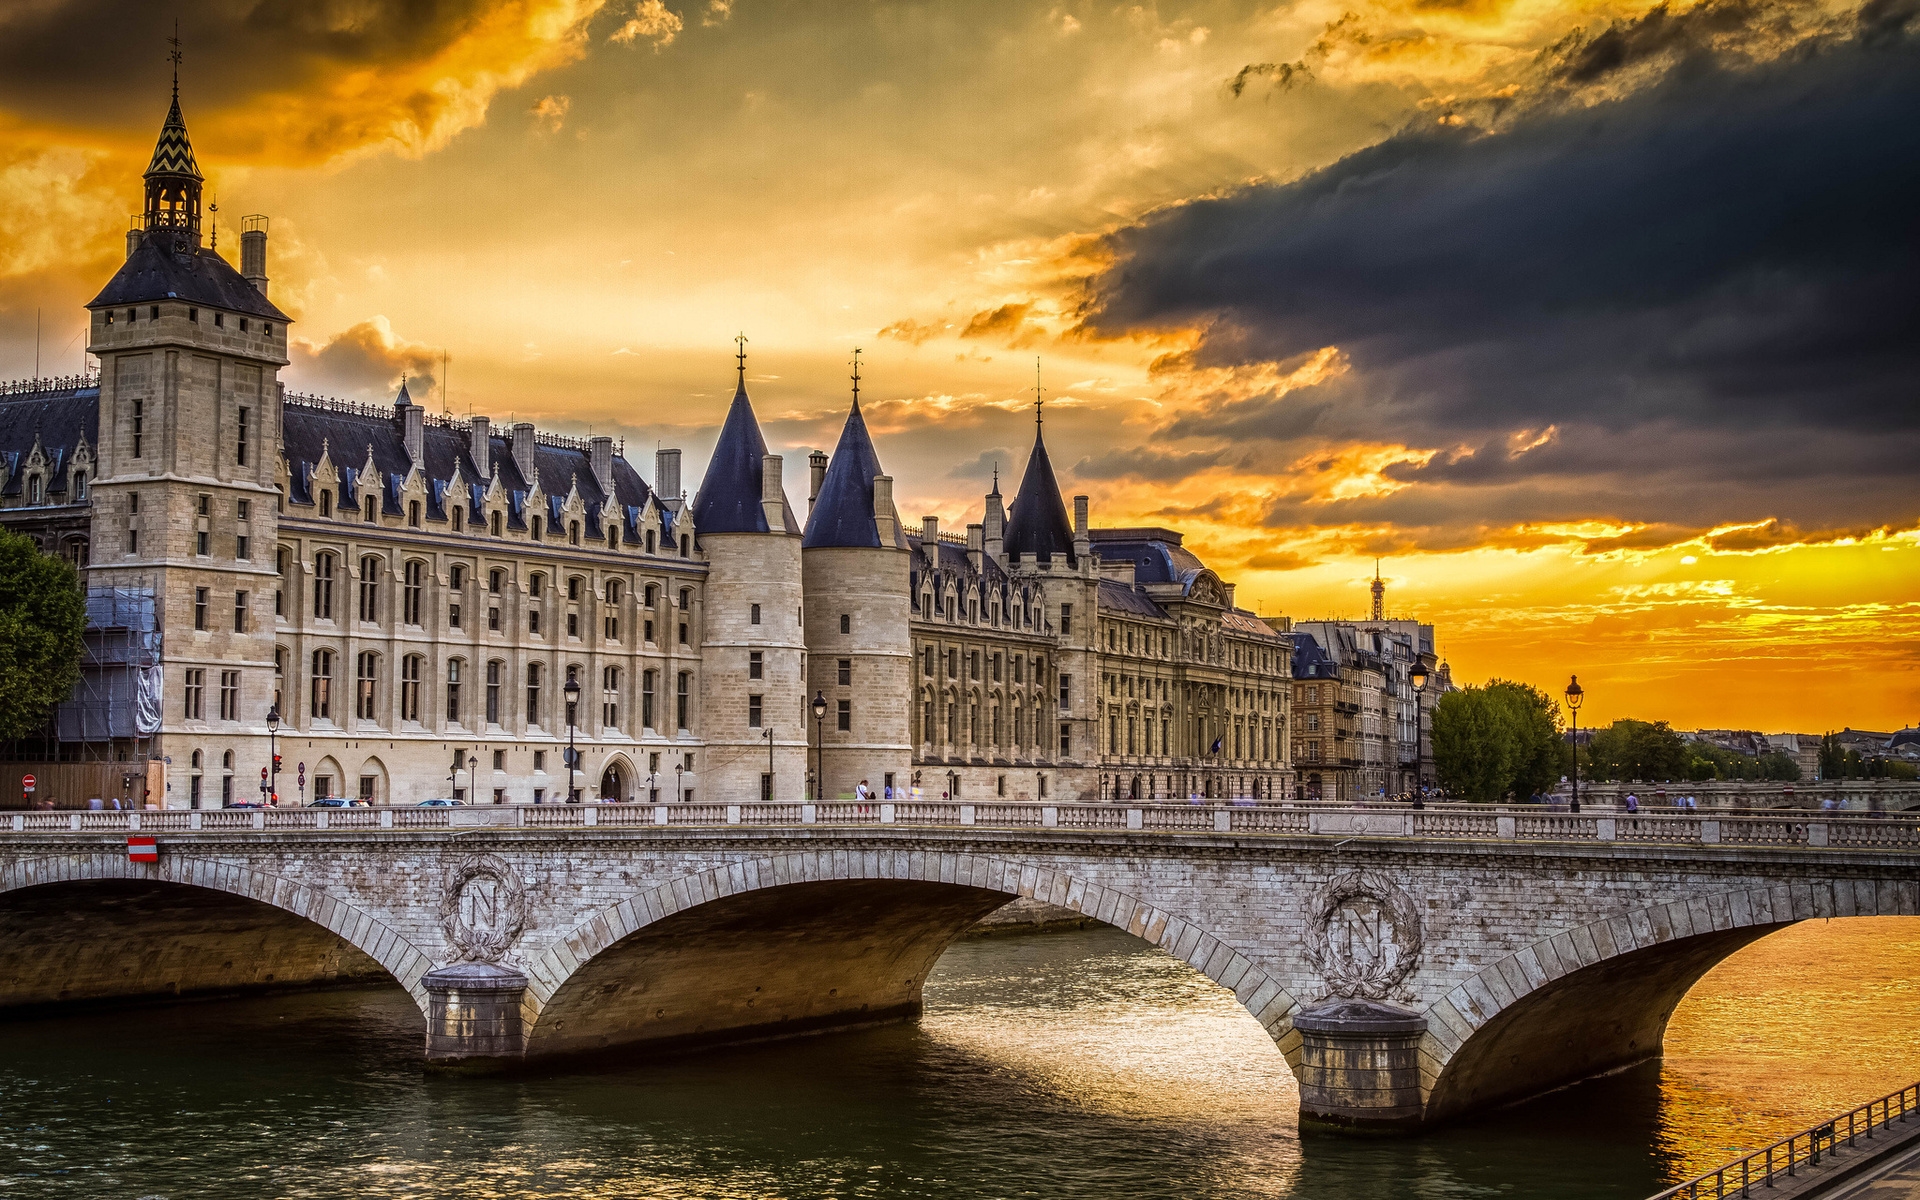 Man Made Conciergerie HD Wallpaper | Background Image